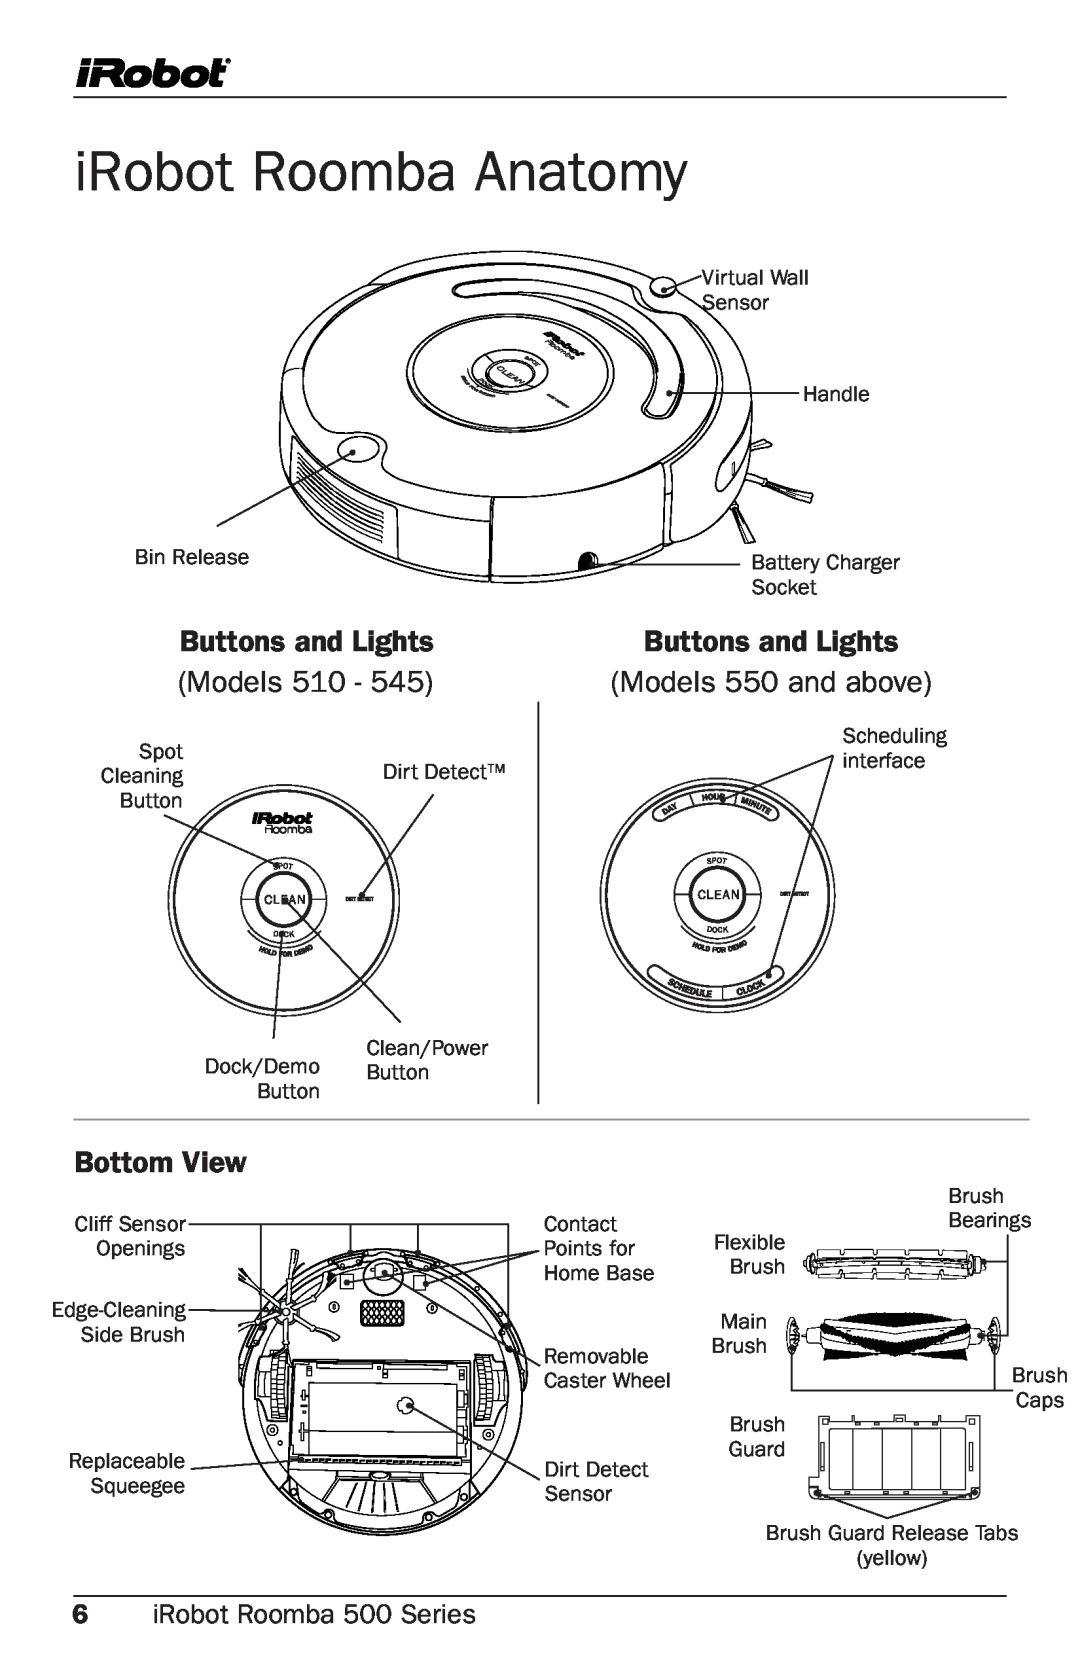 iRobot 500 Series manual iRobot Roomba Anatomy, Buttons and Lights Models 550 and above, Bottom View 